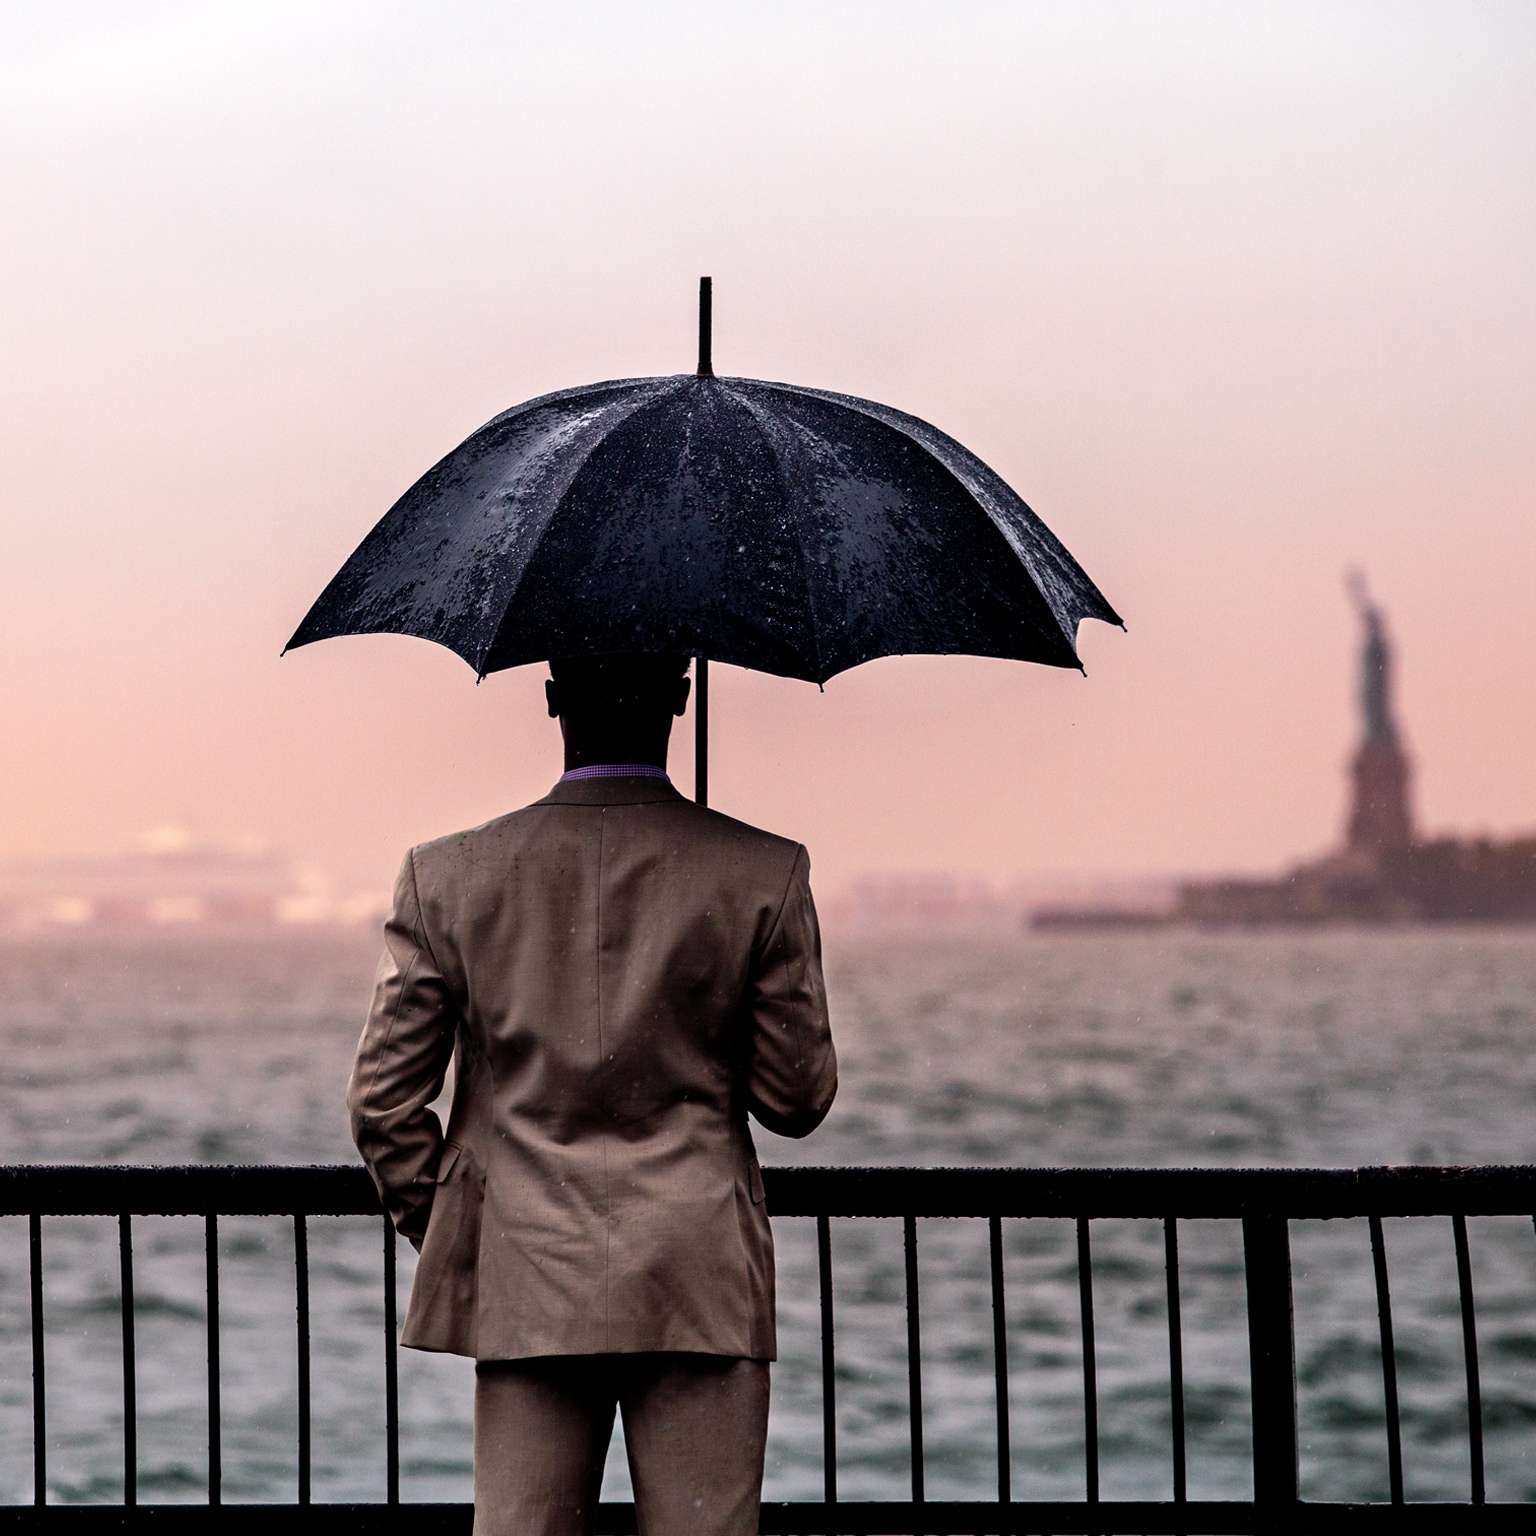 Image of a man looking at the Statue of Liberty in the distance while holding an umbrella